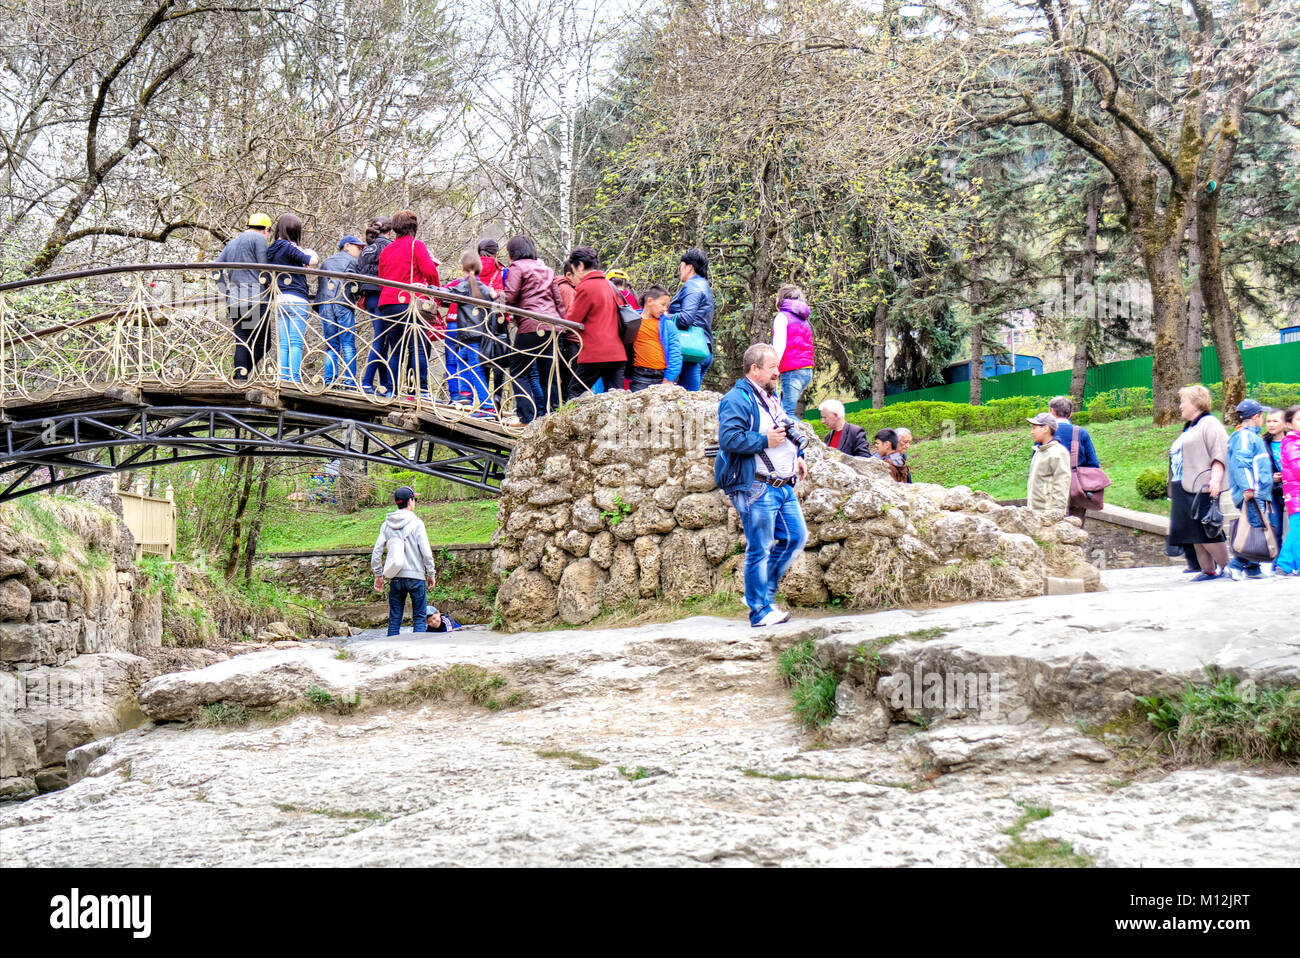 KISLOVODSK, RUSSIA - April 30.2015 : Tourists from a bridge examine the mountain river Olhovka in a municipal park Stock Photo